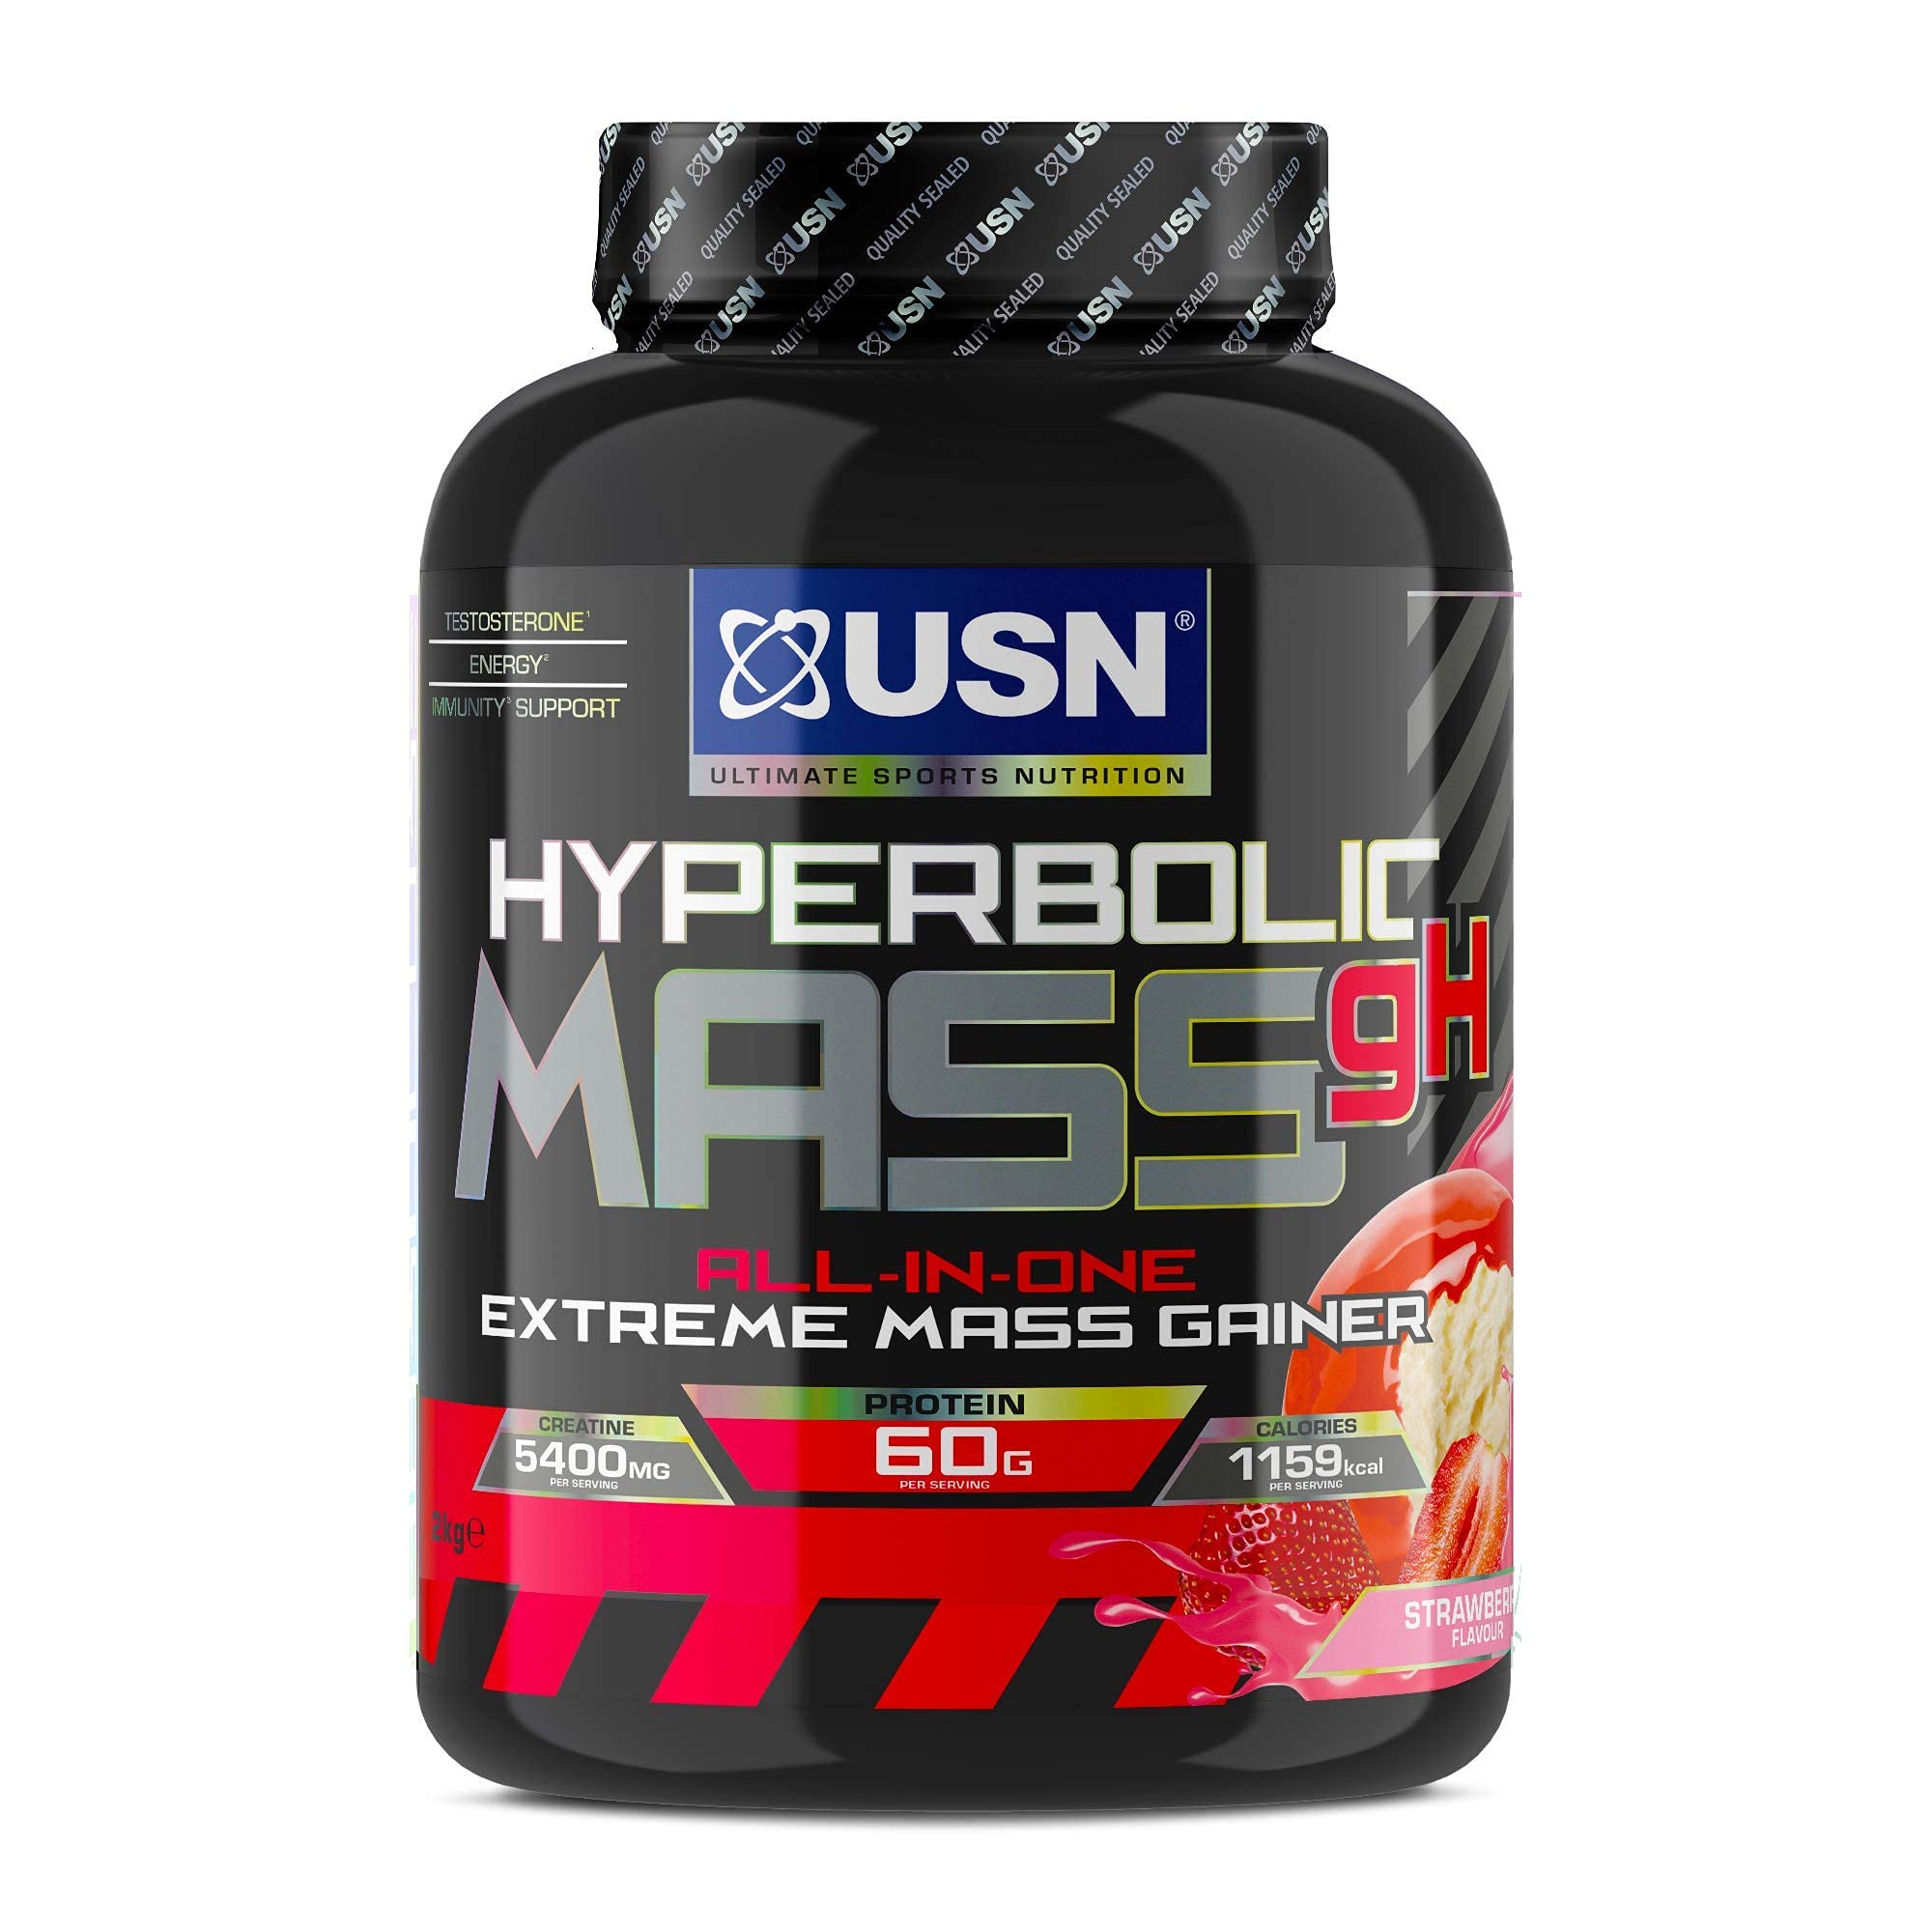 USN Hyperbolic Mass Strawberry 2kg: All-in-One Mass Gainer Protein Powder for Fast, Effective Weight & Mass Gain